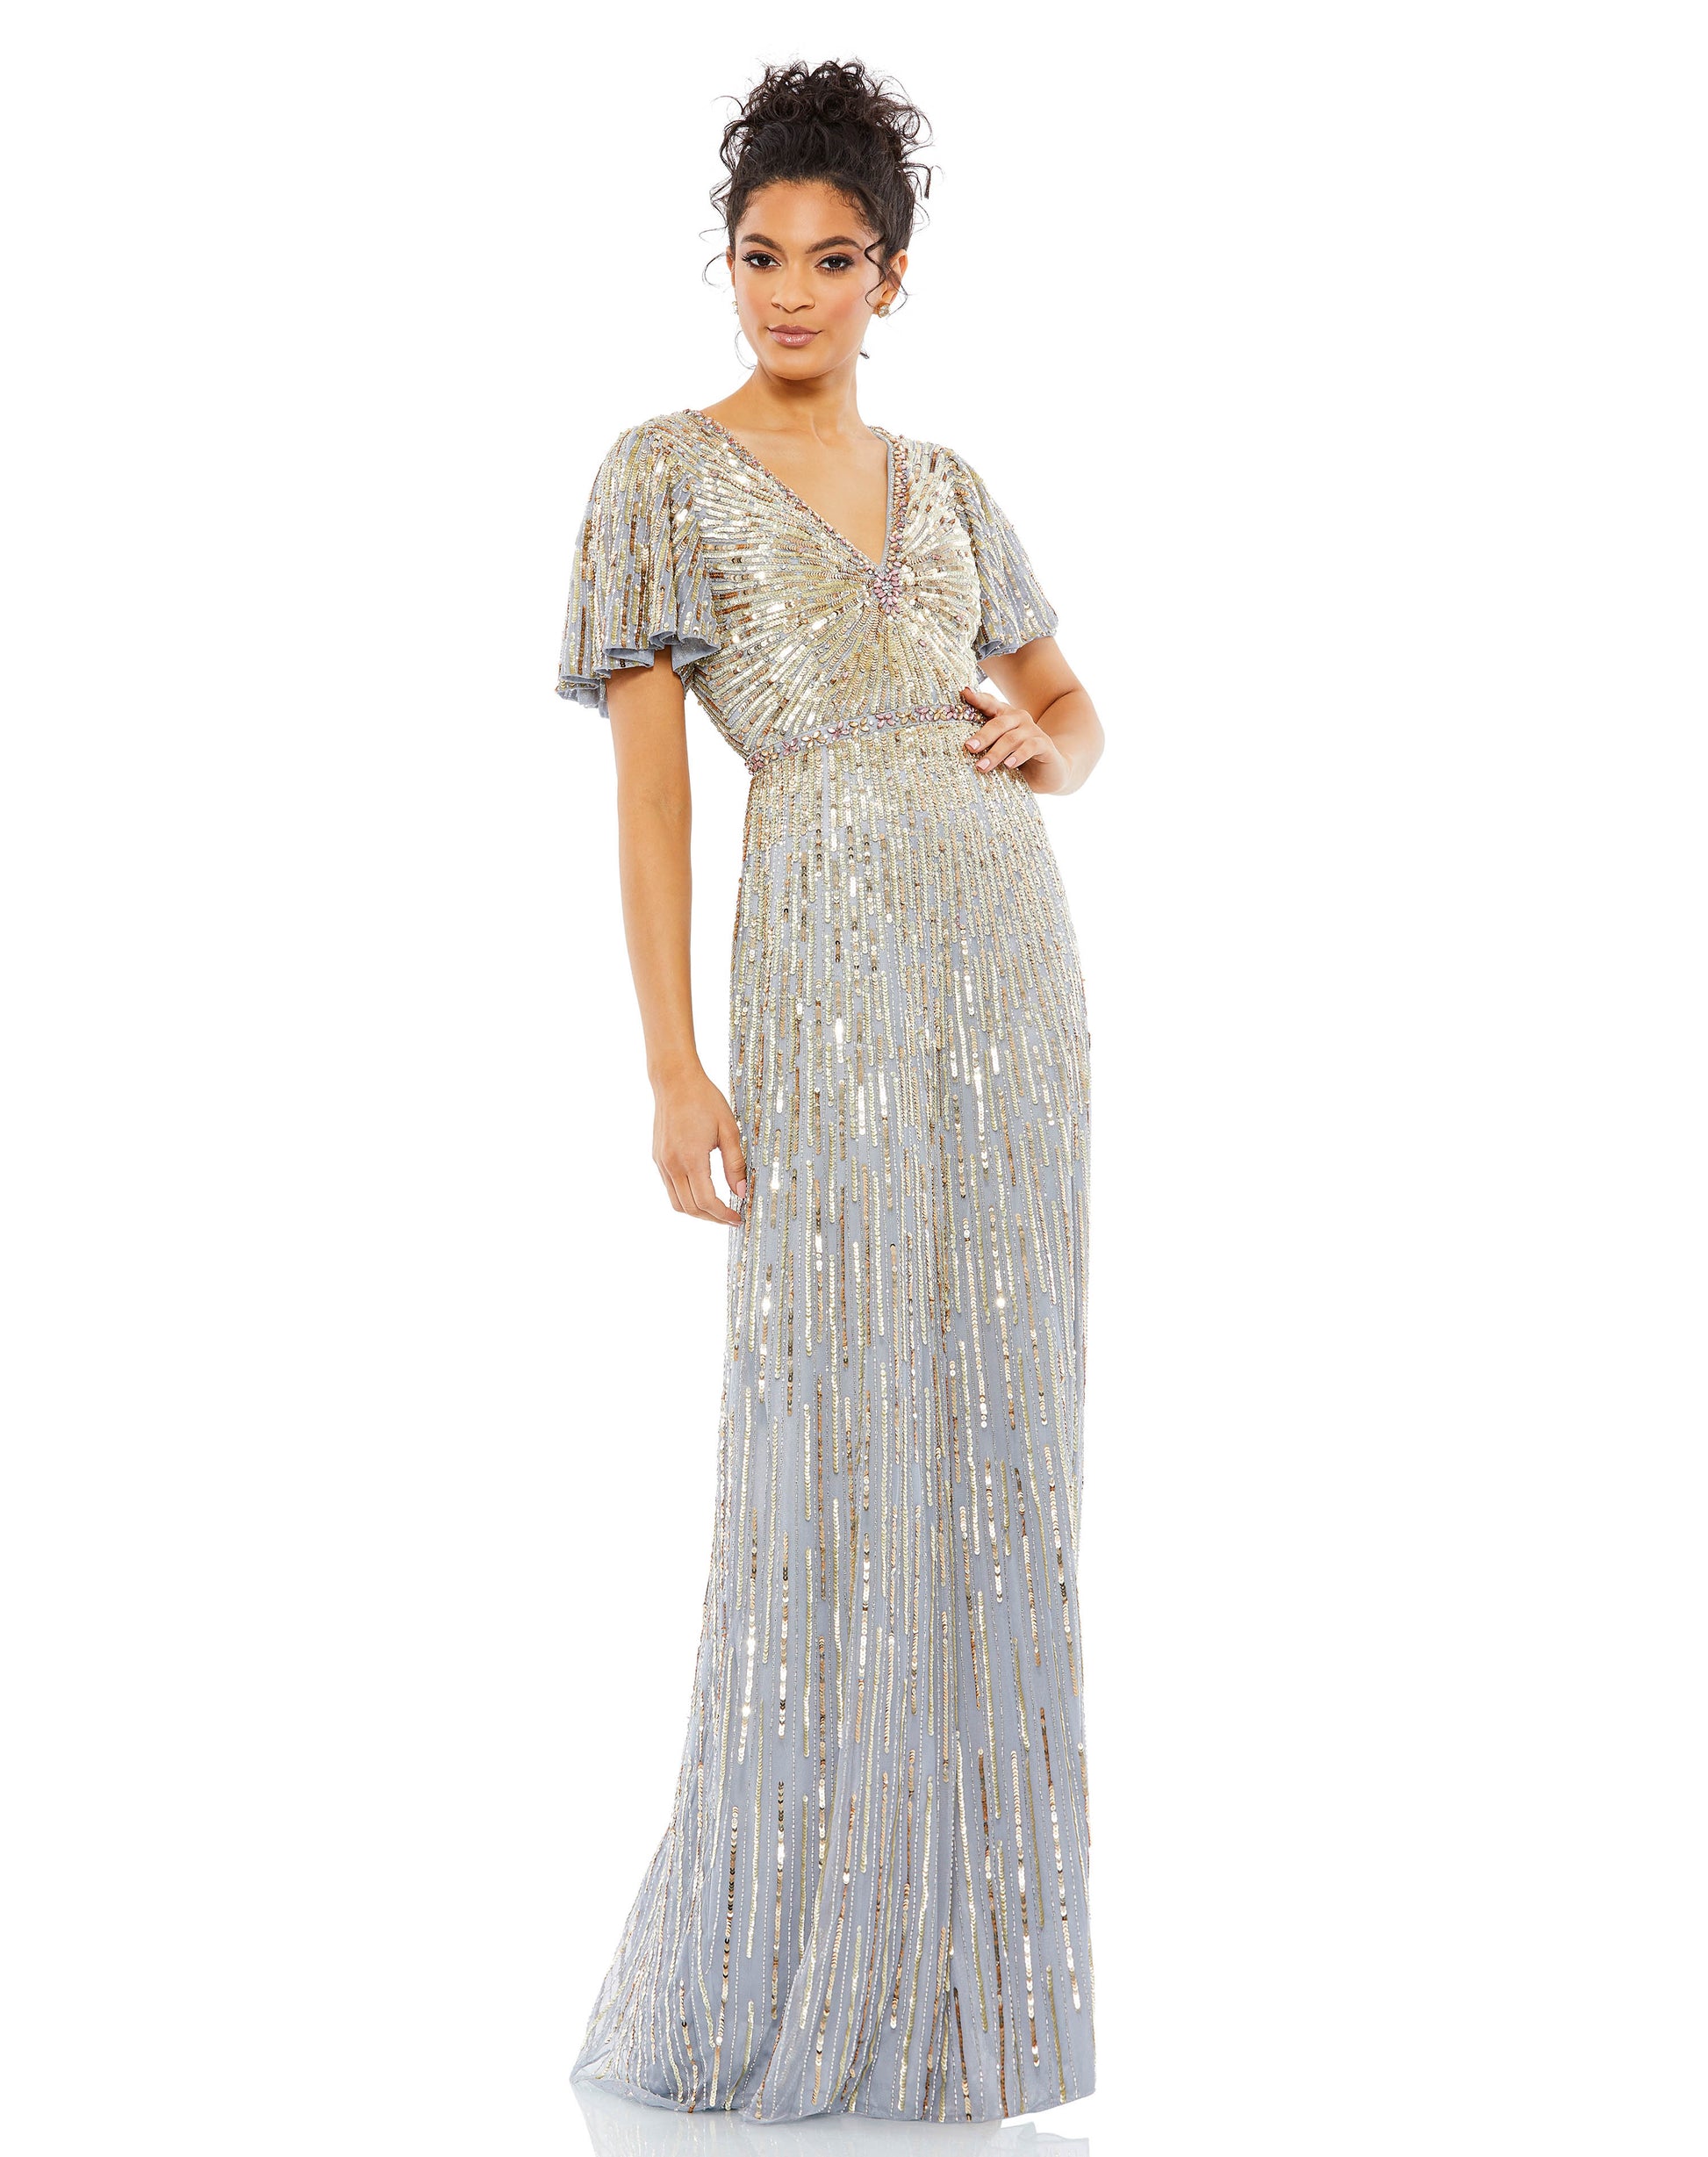 Mac Duggal Sequined mesh overlay; 100% polyester lining Fully lined through bodice and skirt; semi-sheer unlined sleeves V-neckline Short butterfly sleeves Bejeweled neckline and waist detailing Allover embellished pattern featuring angled hand-stitched s